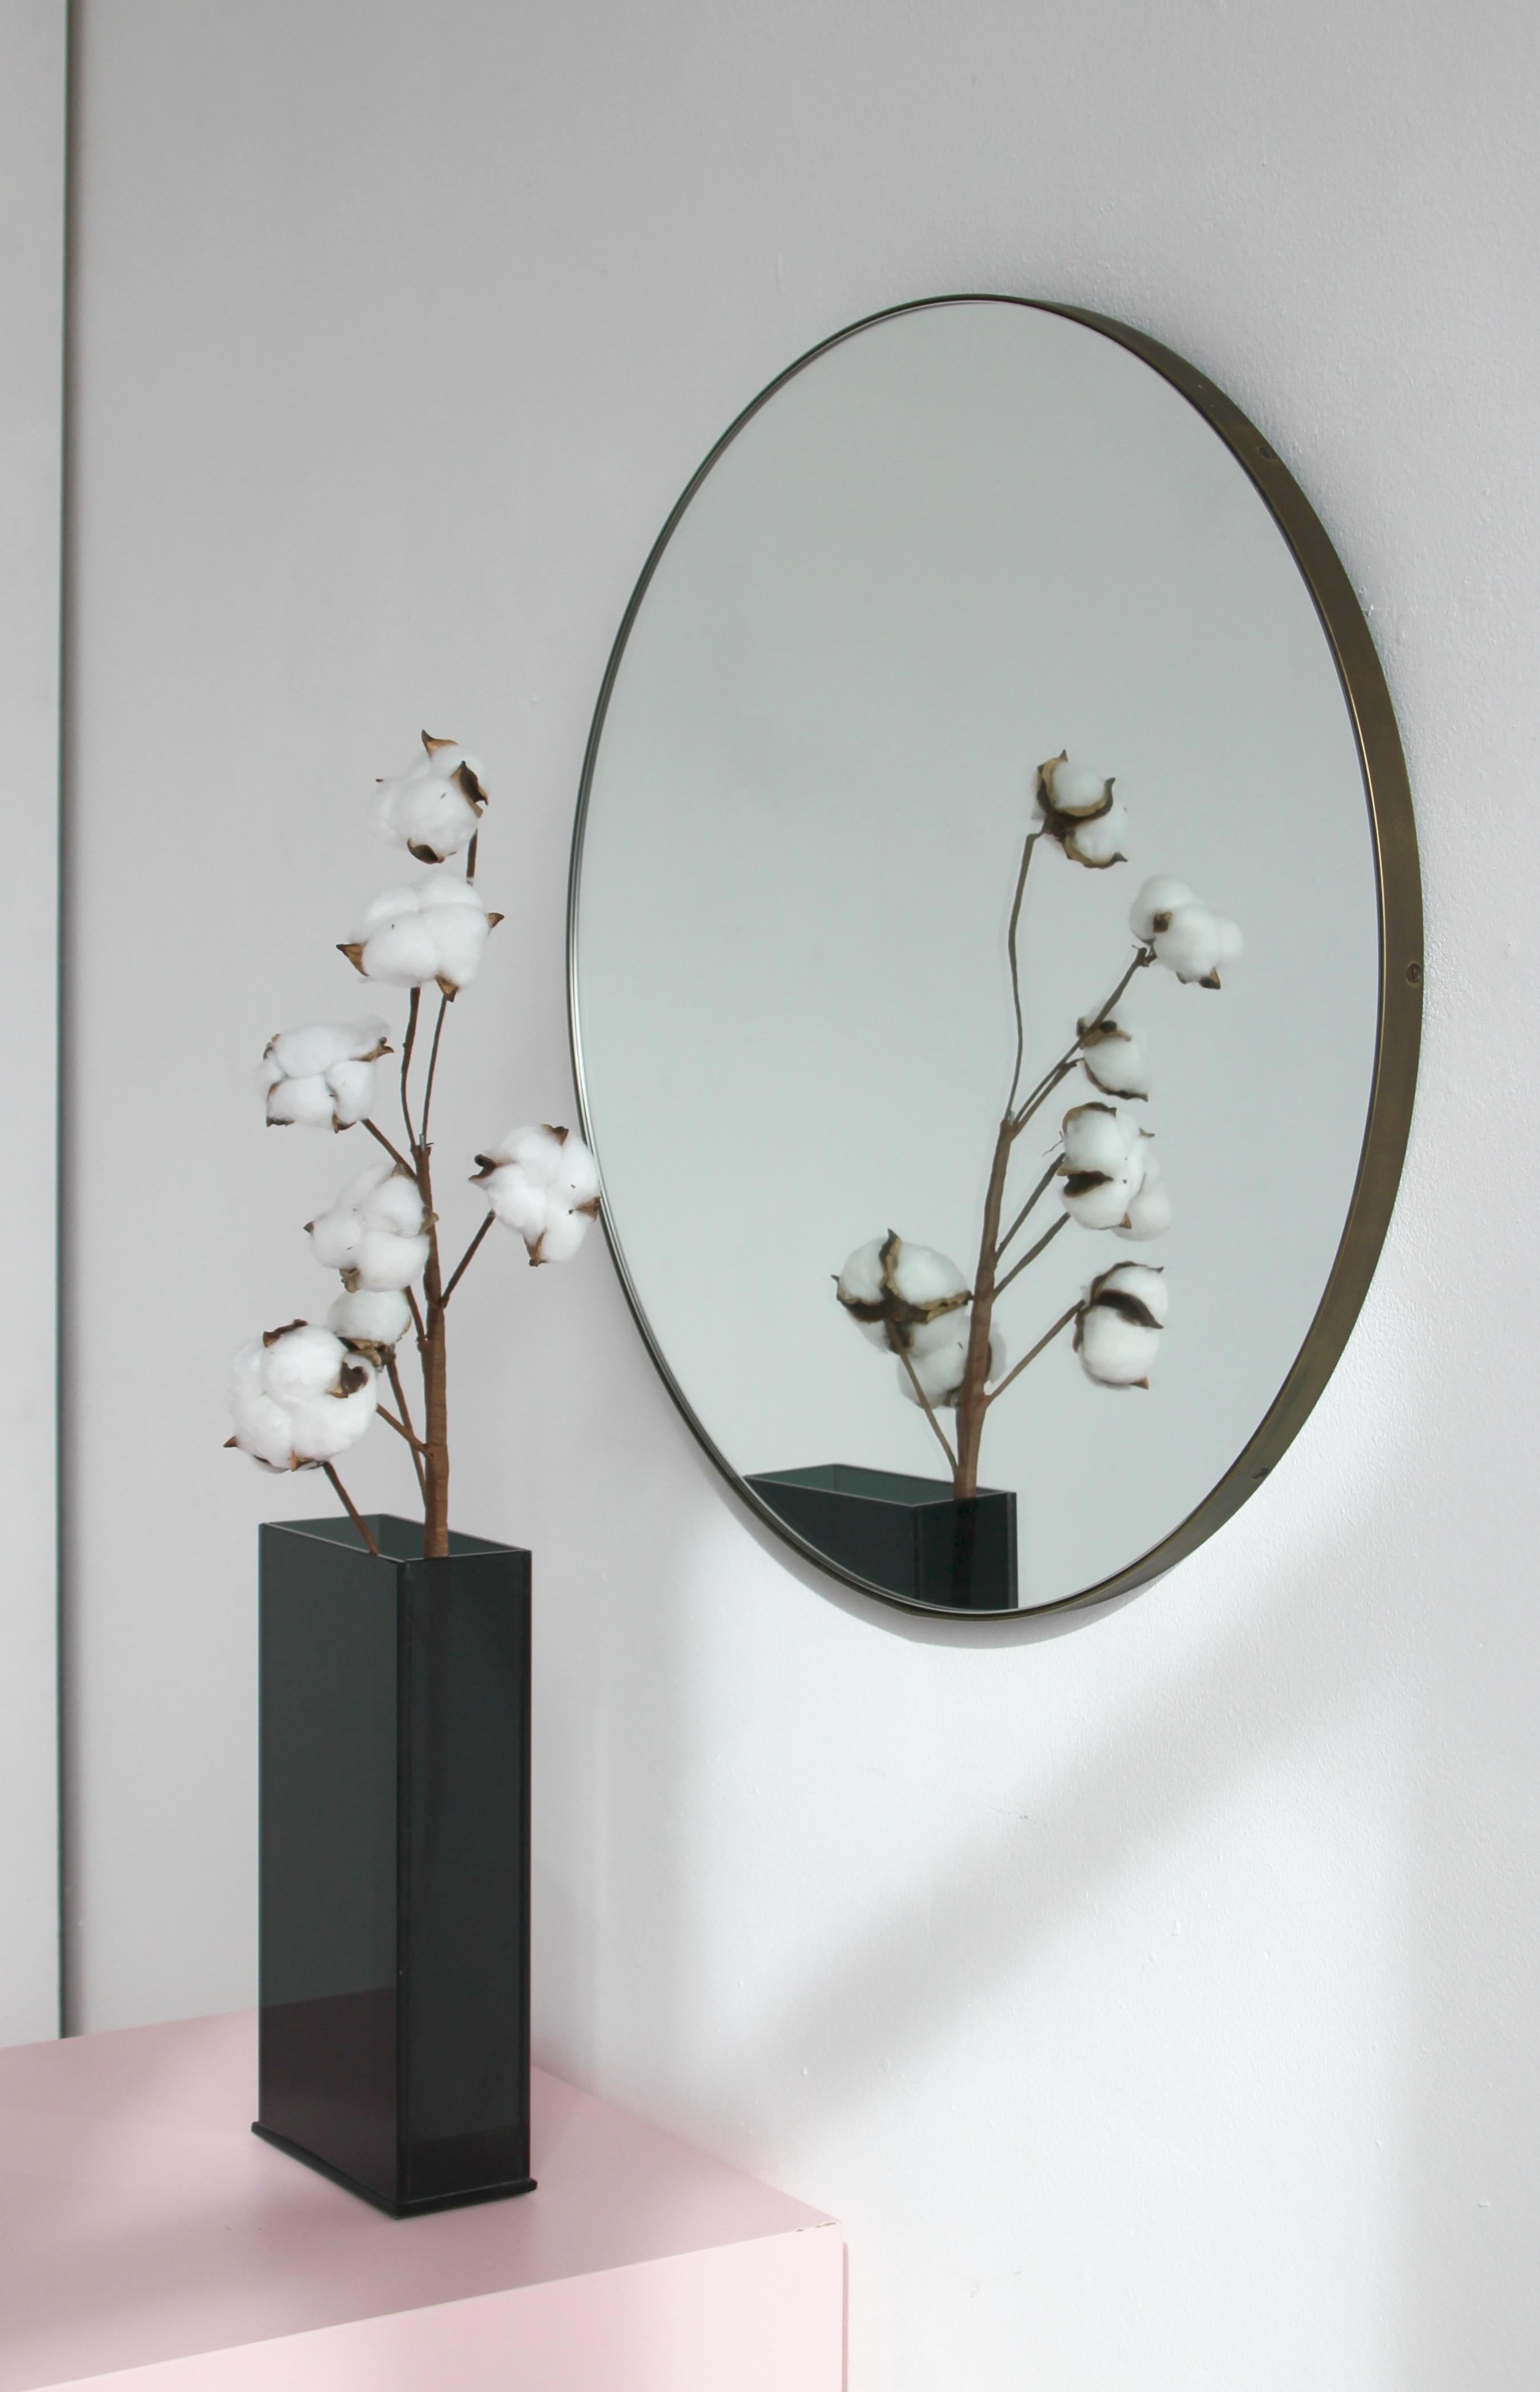 Minimalist round mirror with an elegant bronze patina brass frame. Designed and handcrafted in London, UK.

Medium, large and extra-large mirrors (60, 80 and 100cm) are fitted with an ingenious French cleat (split batten) system so they may hang